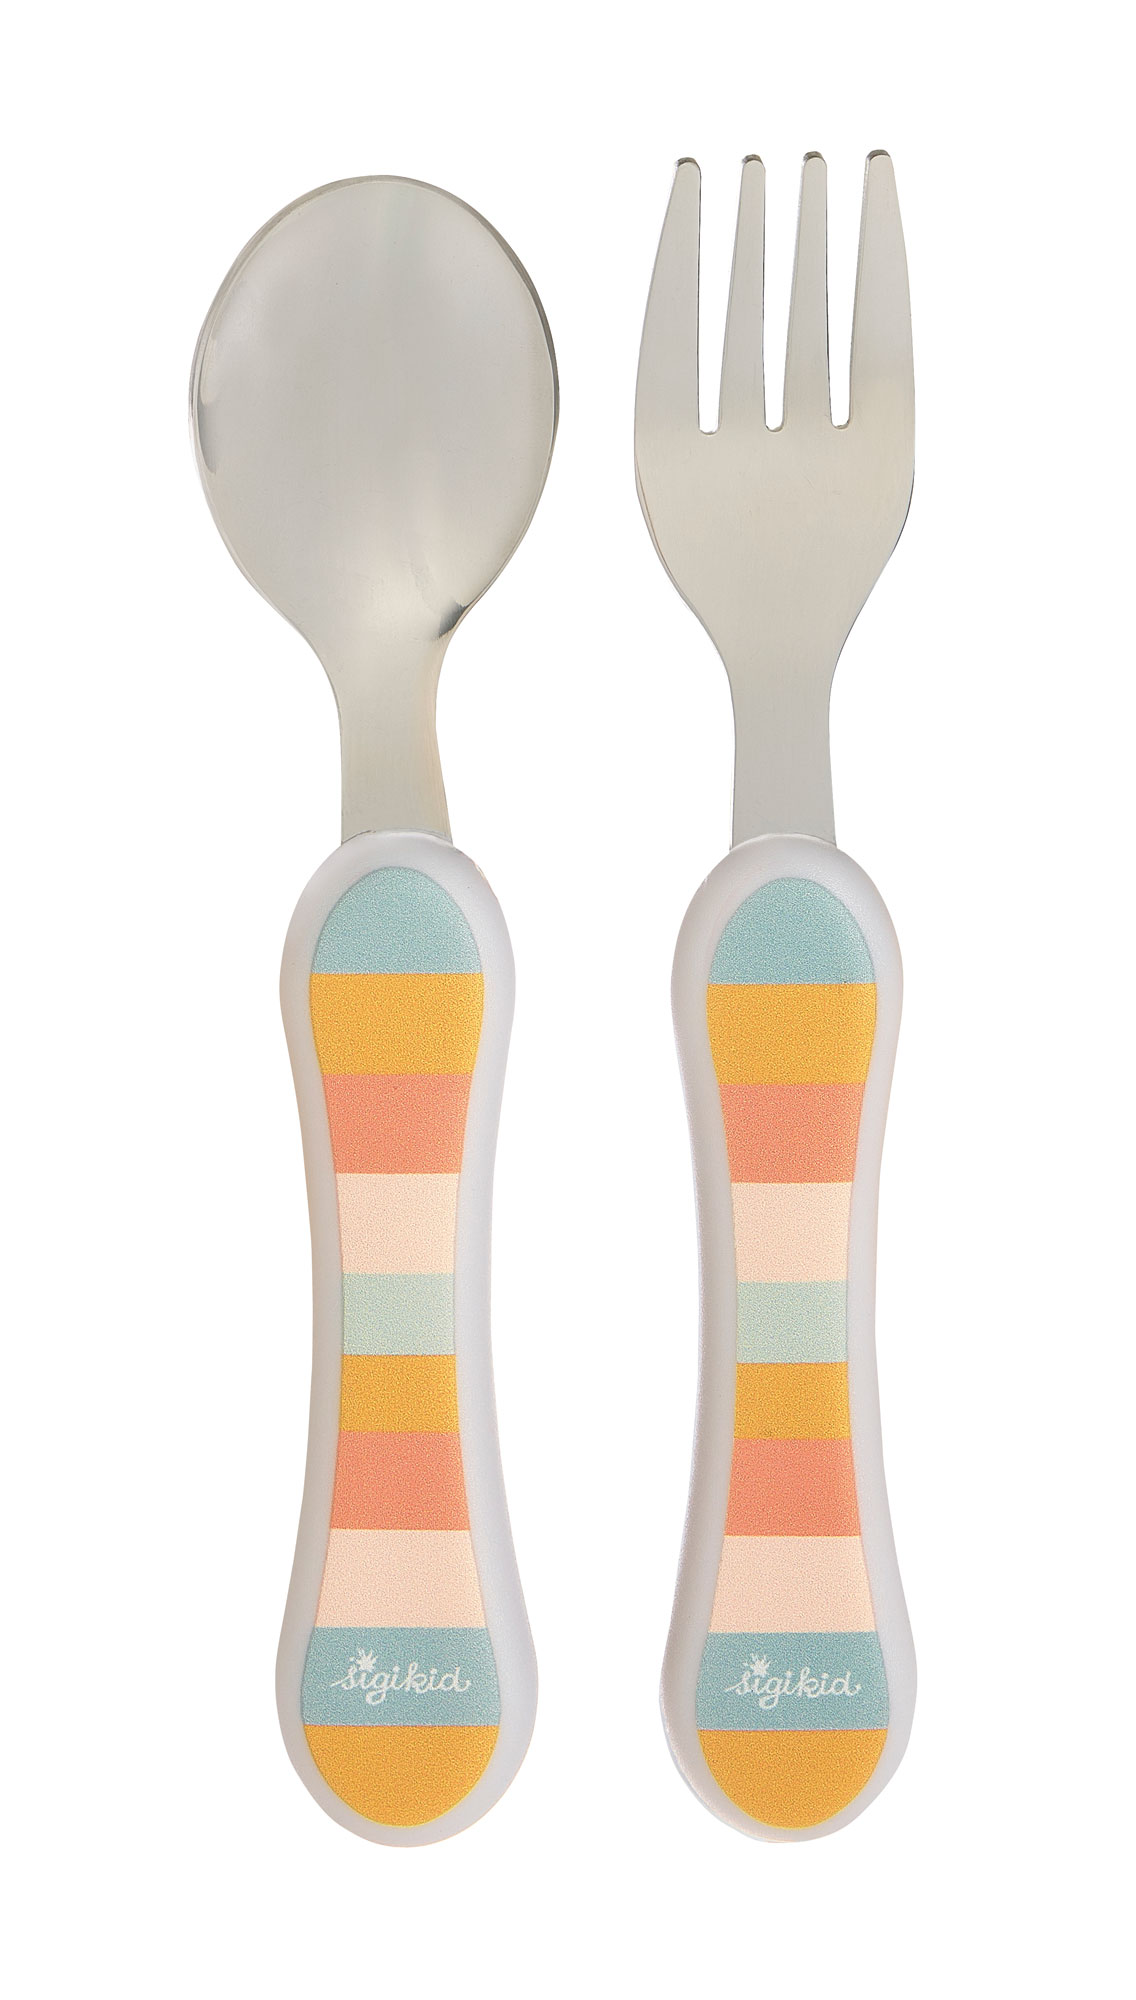 Children's cutlery set fork and spoon, 4 friends